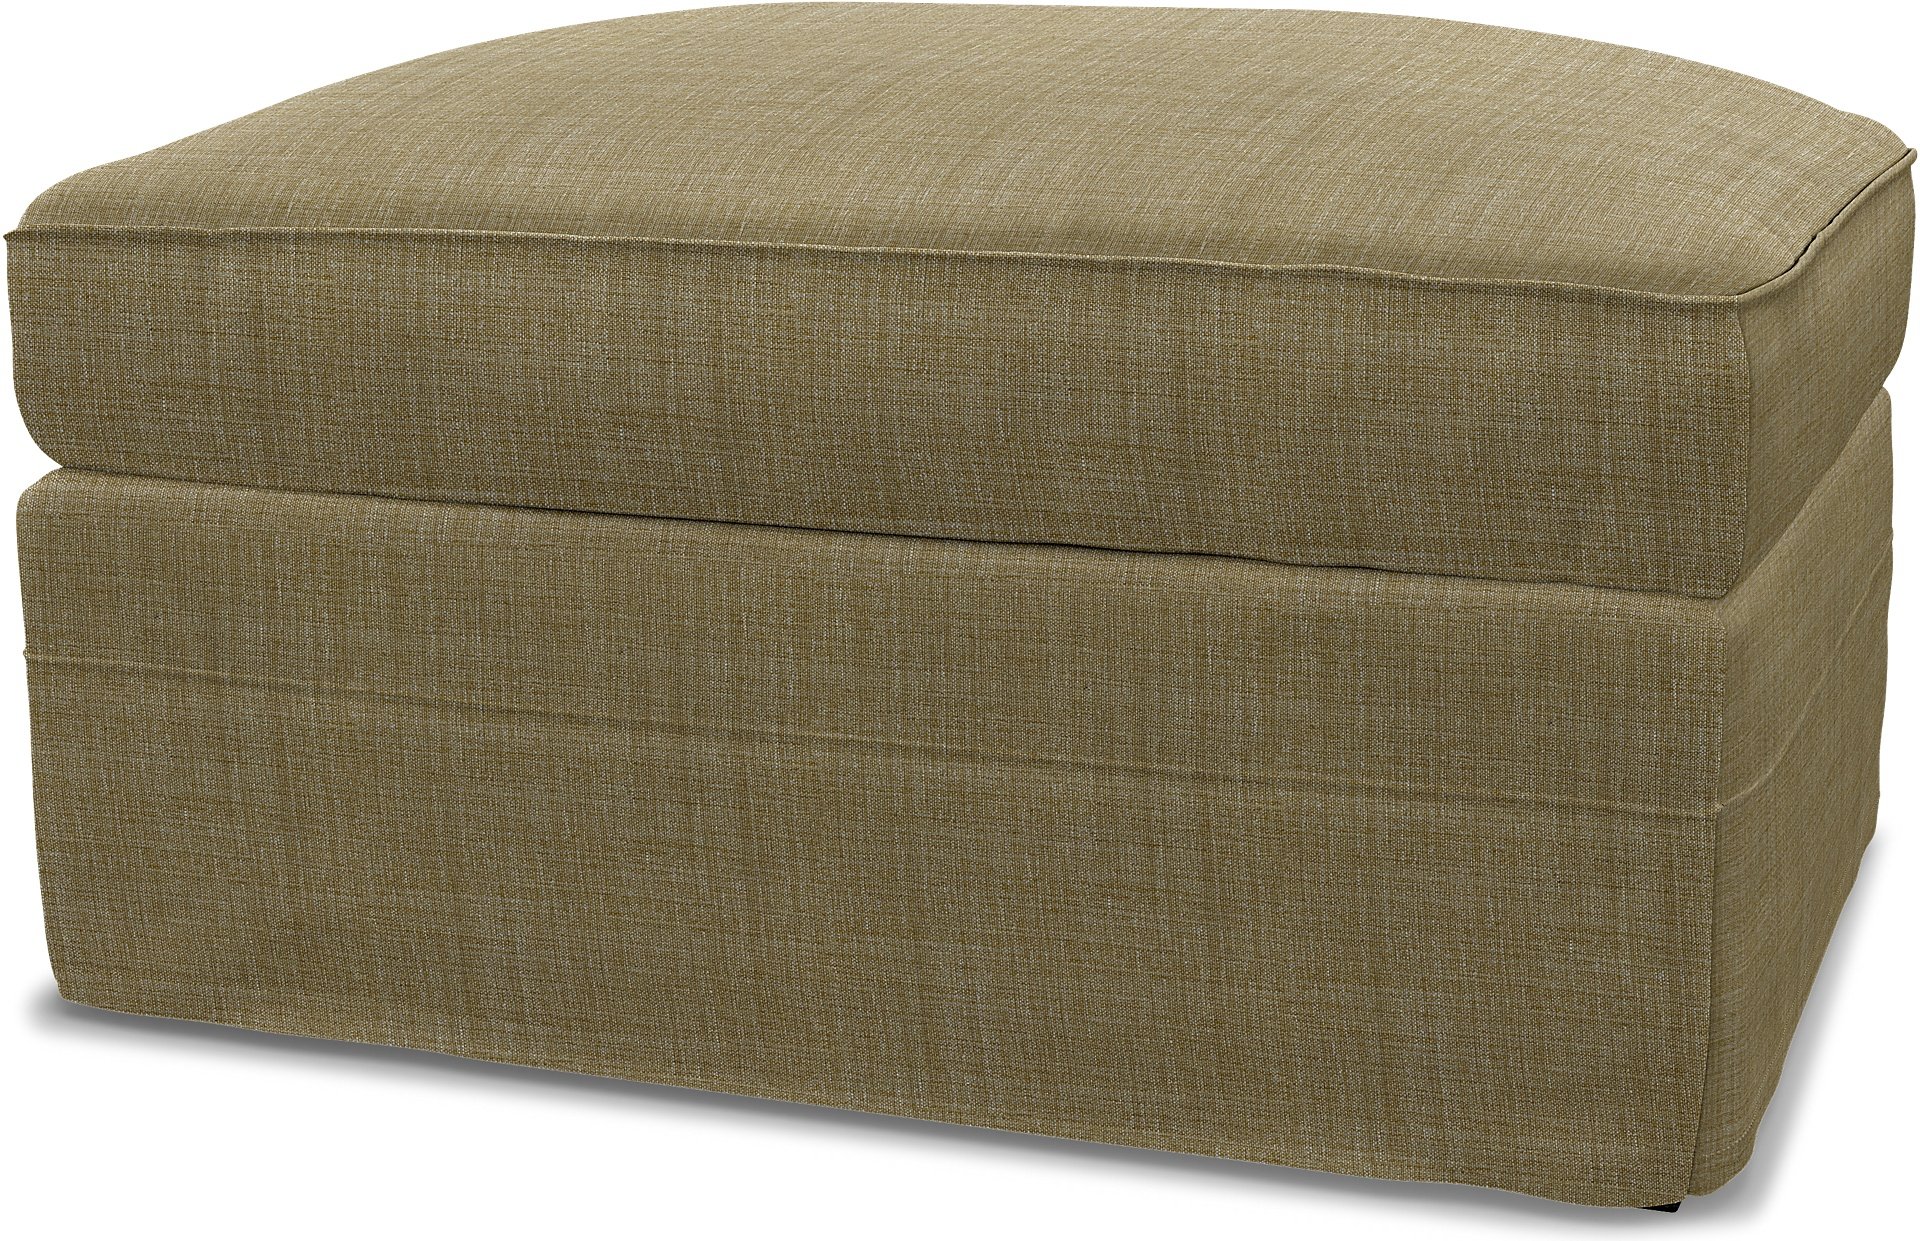 IKEA - Gronlid Footstool with Storage Cover, Dusty Yellow, Boucle & Texture - Bemz